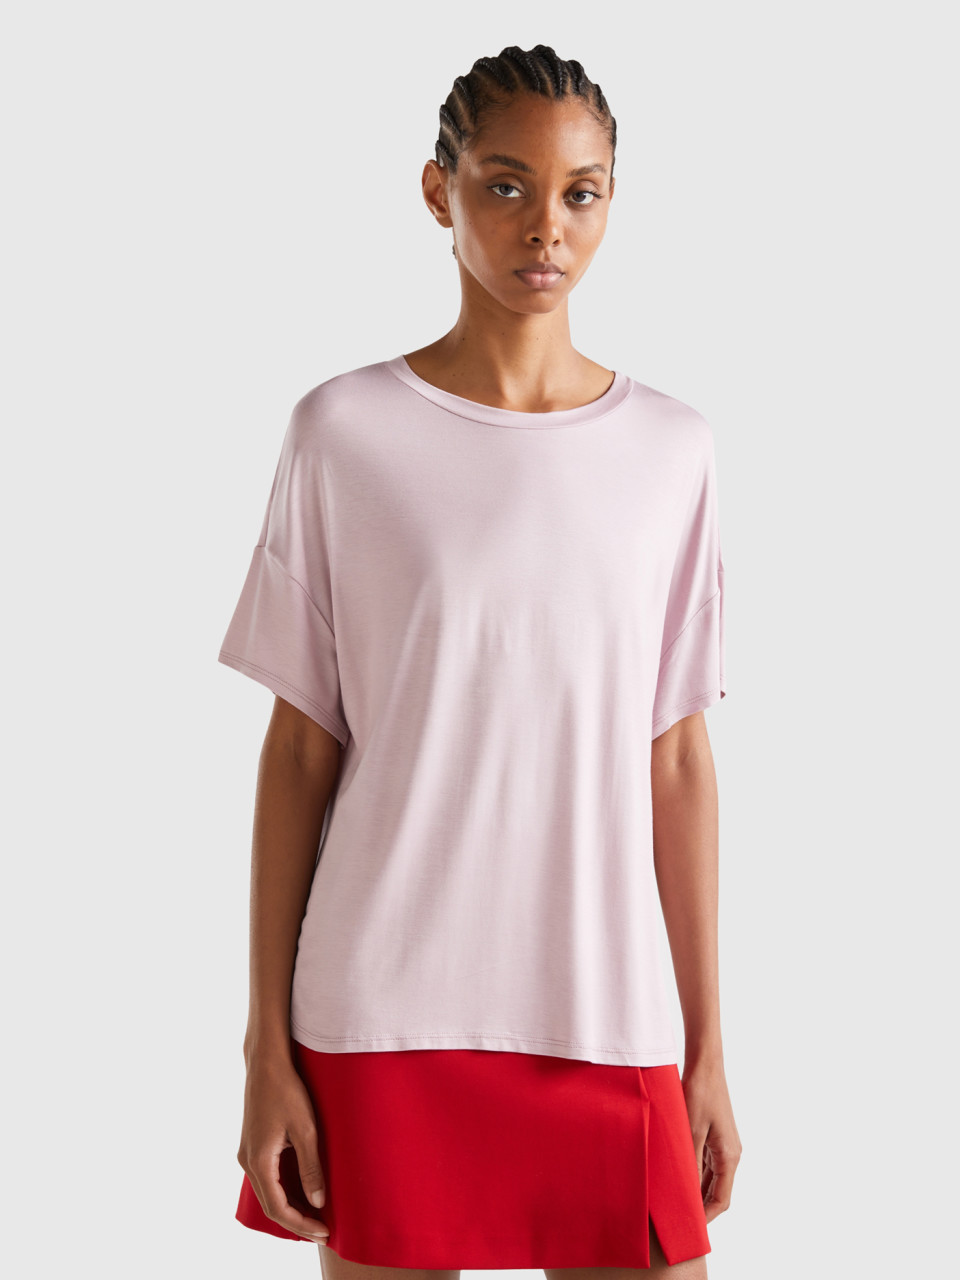 Benetton, T-shirt In Sustainable Stretch Viscose, Soft Pink, Women